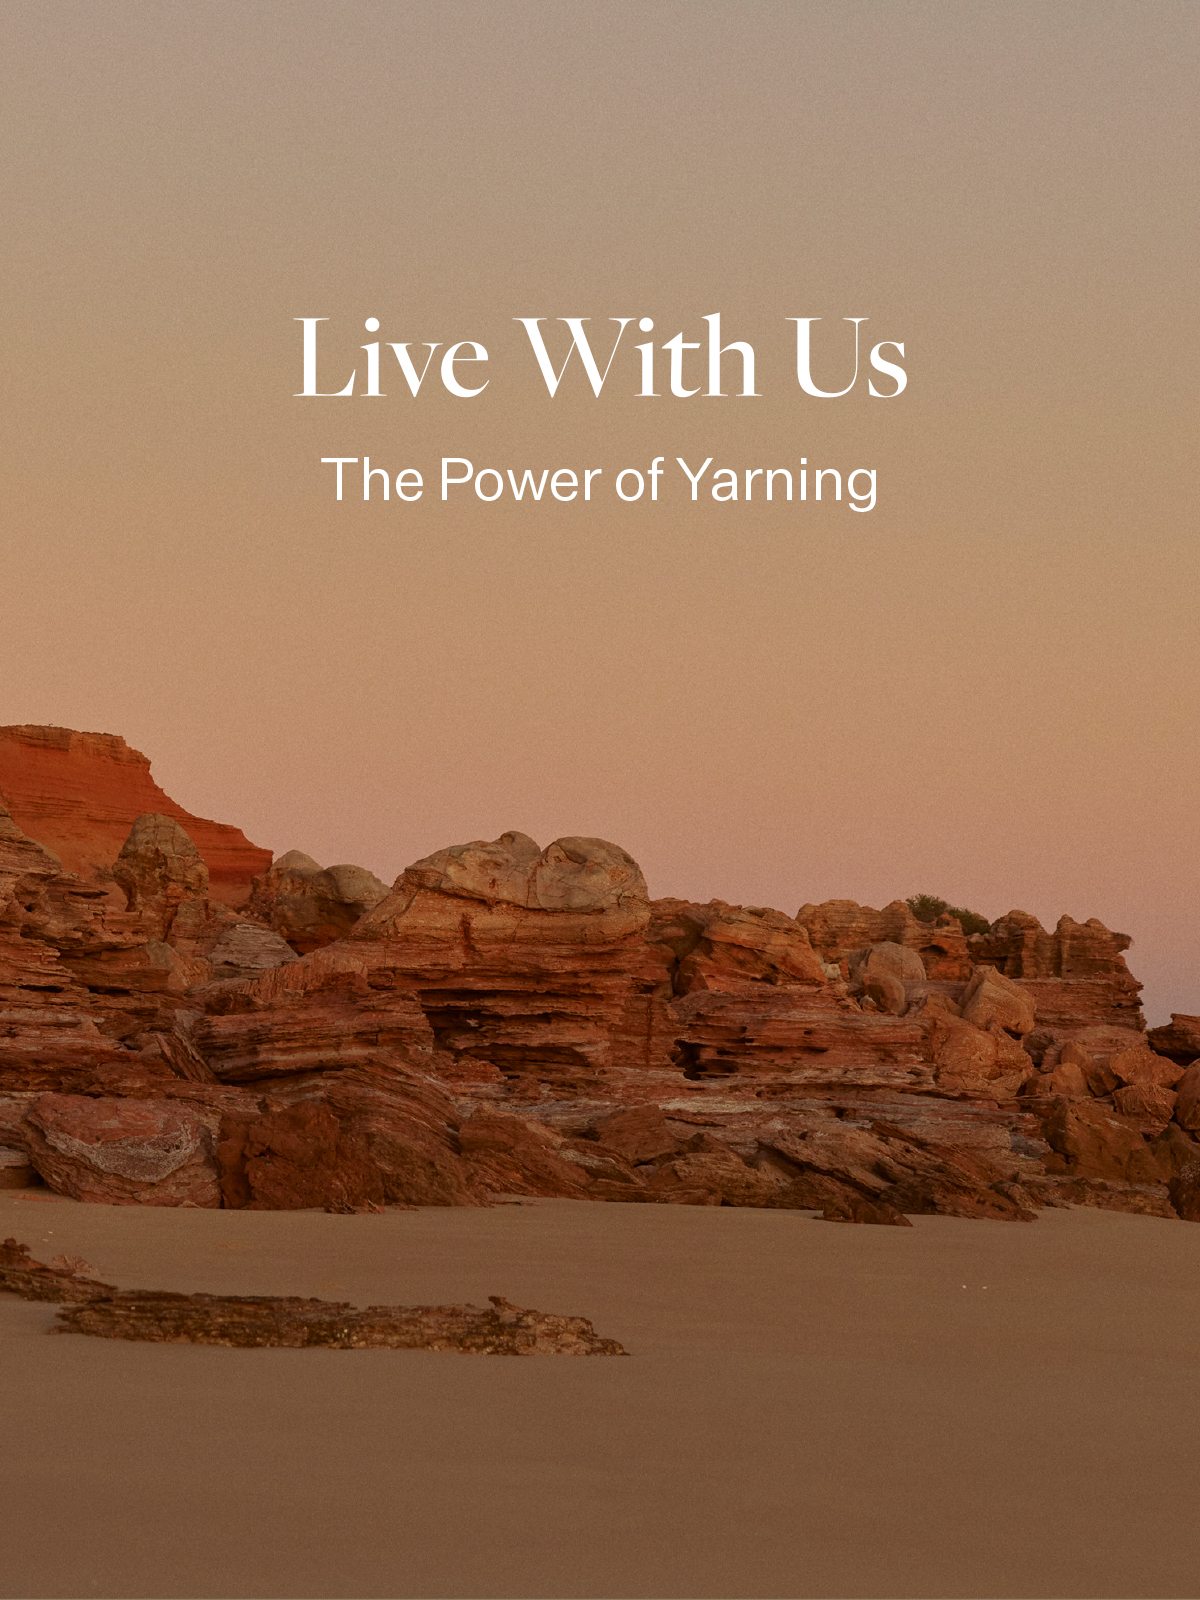 Live With Us | The Power of Yarning